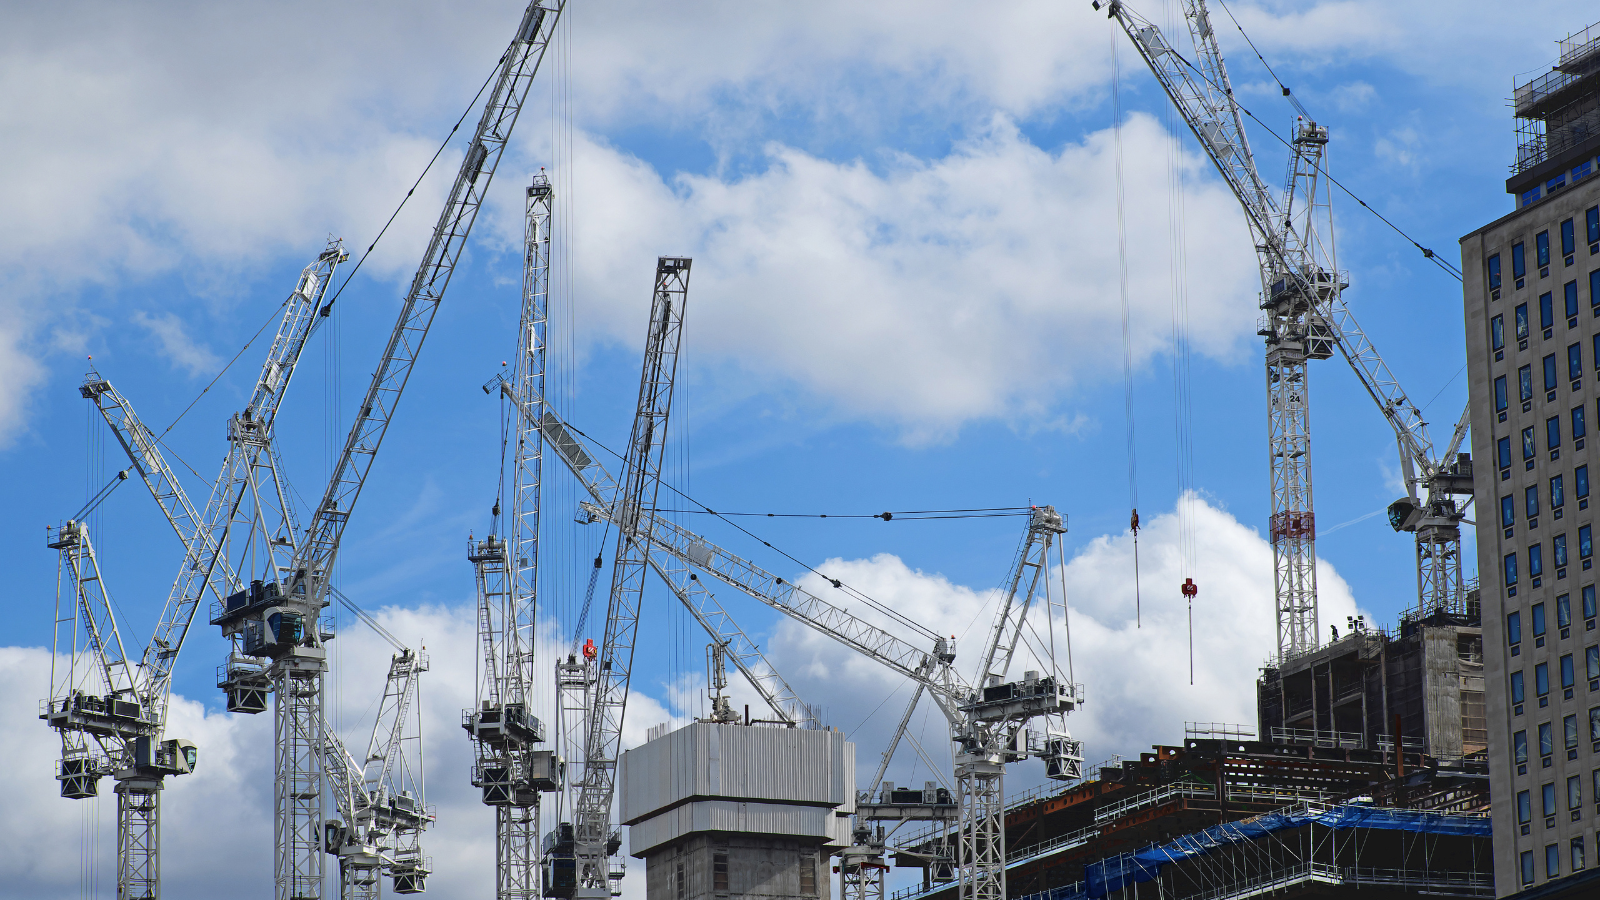 Image of fleet of cranes on a UK construction site with blue skies.